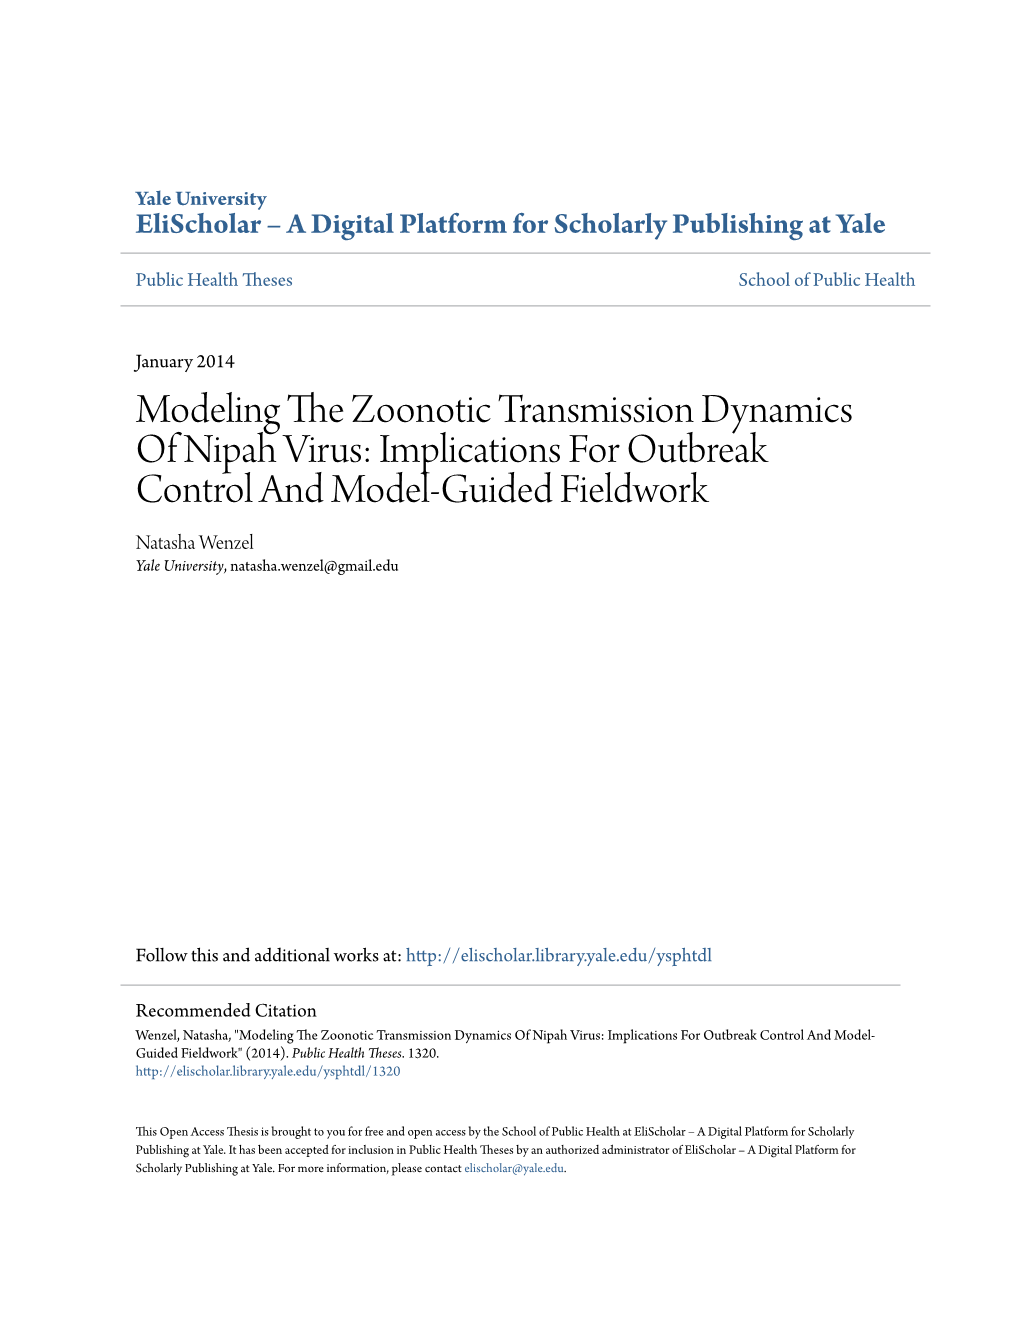 Modeling the Zoonotic Transmission Dynamics of Nipah Virus: Implications for Outbreak Control and Model-Guided Fieldwork